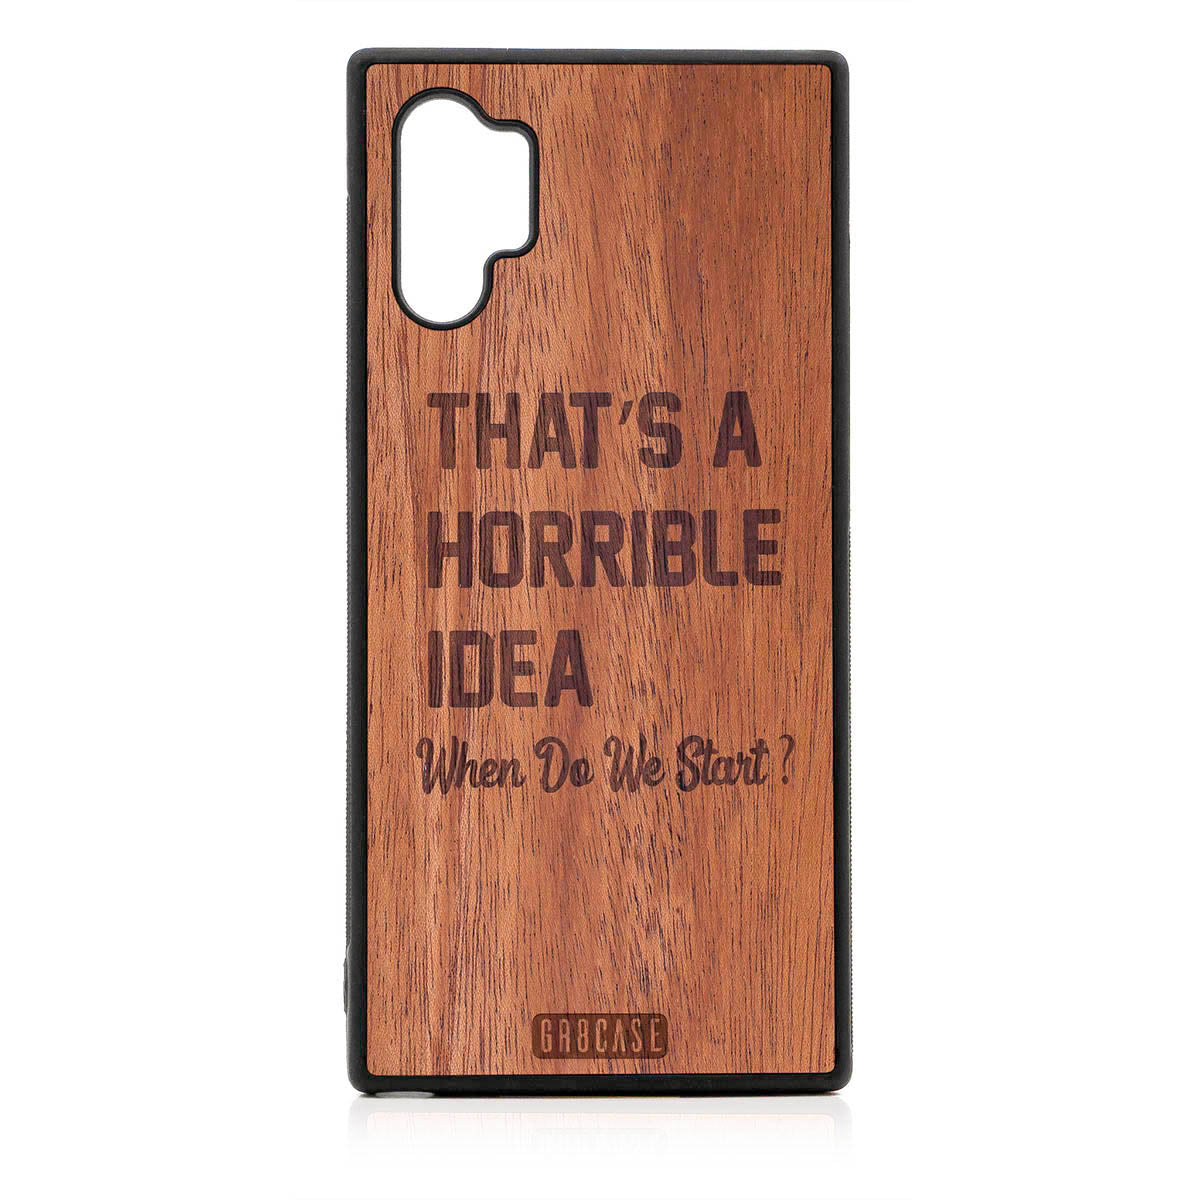 That's A Horrible Idea When Do We Start? Design Wood Case For Samsung Galaxy Note 10 Plus